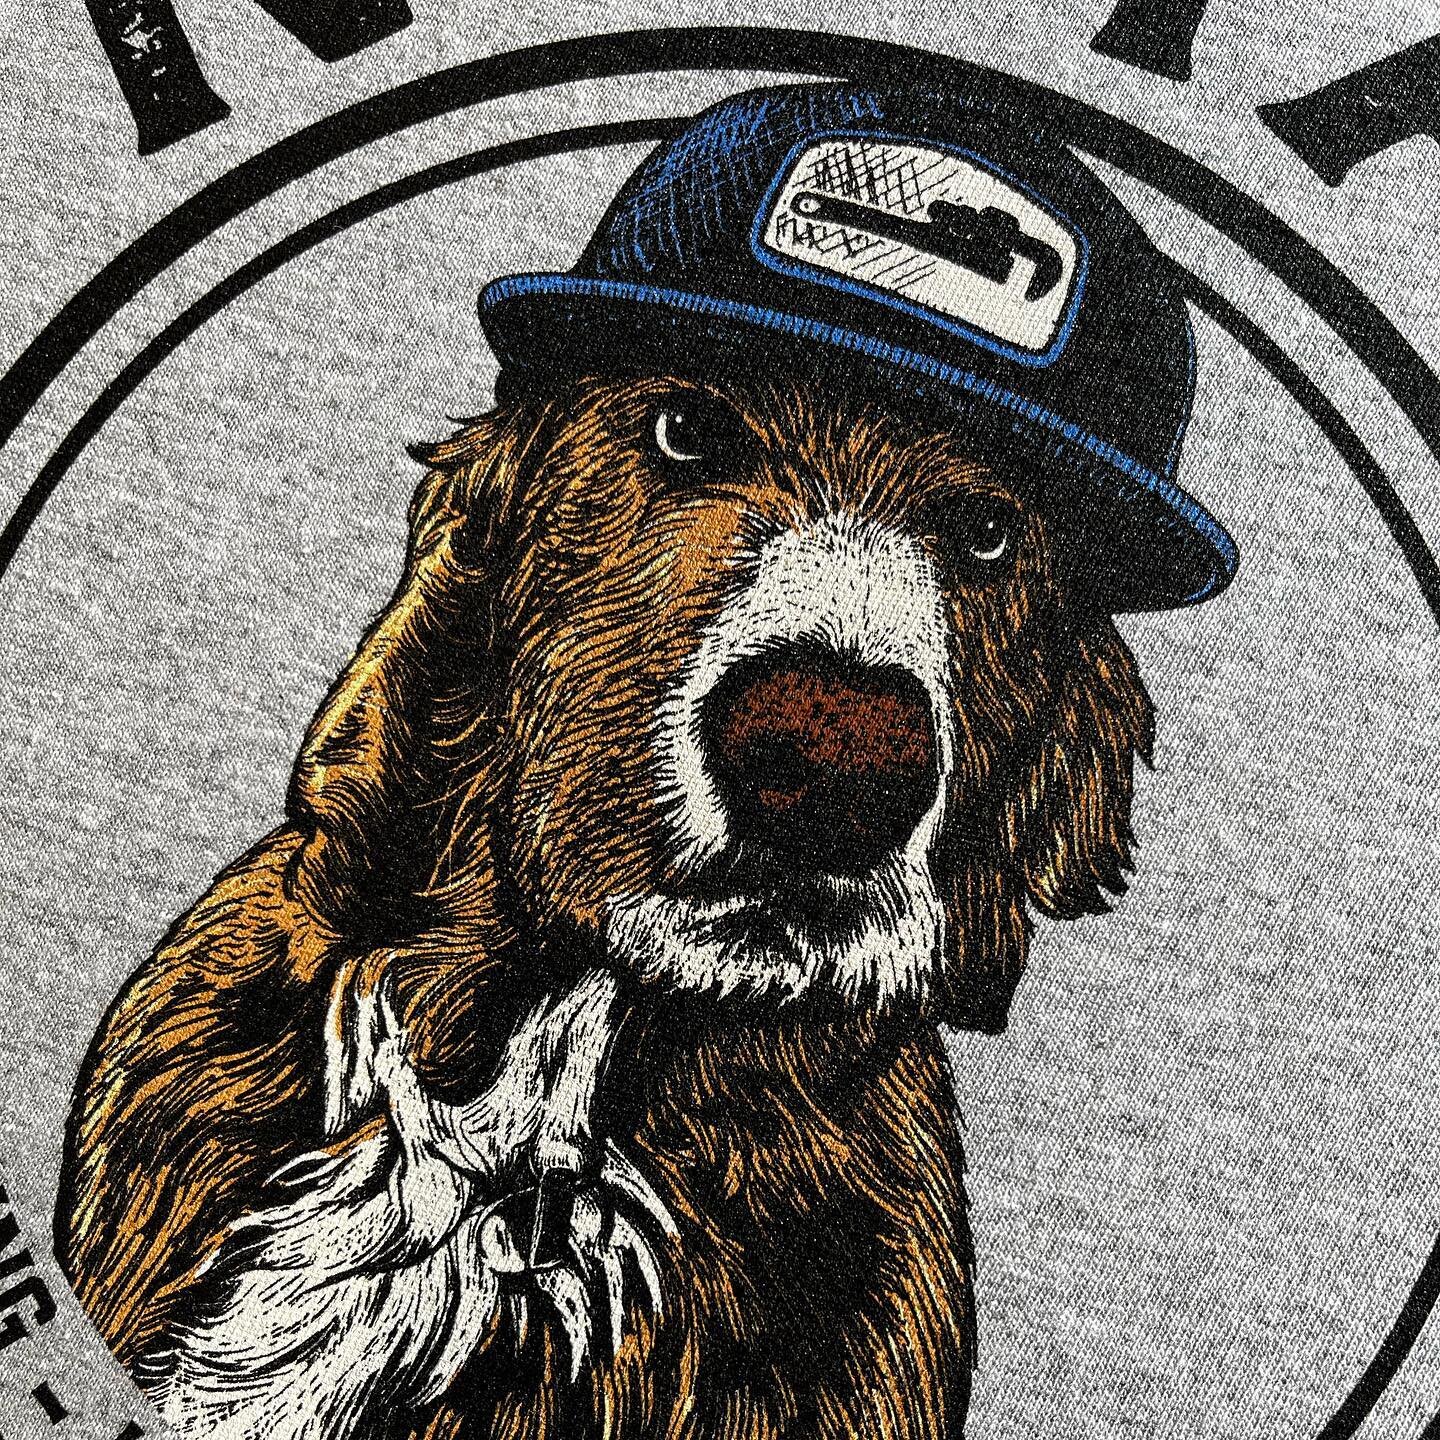 Some swag we whipped up for @nomadmechanical 🐕 #FURreal  #PAWsome #DOGshit